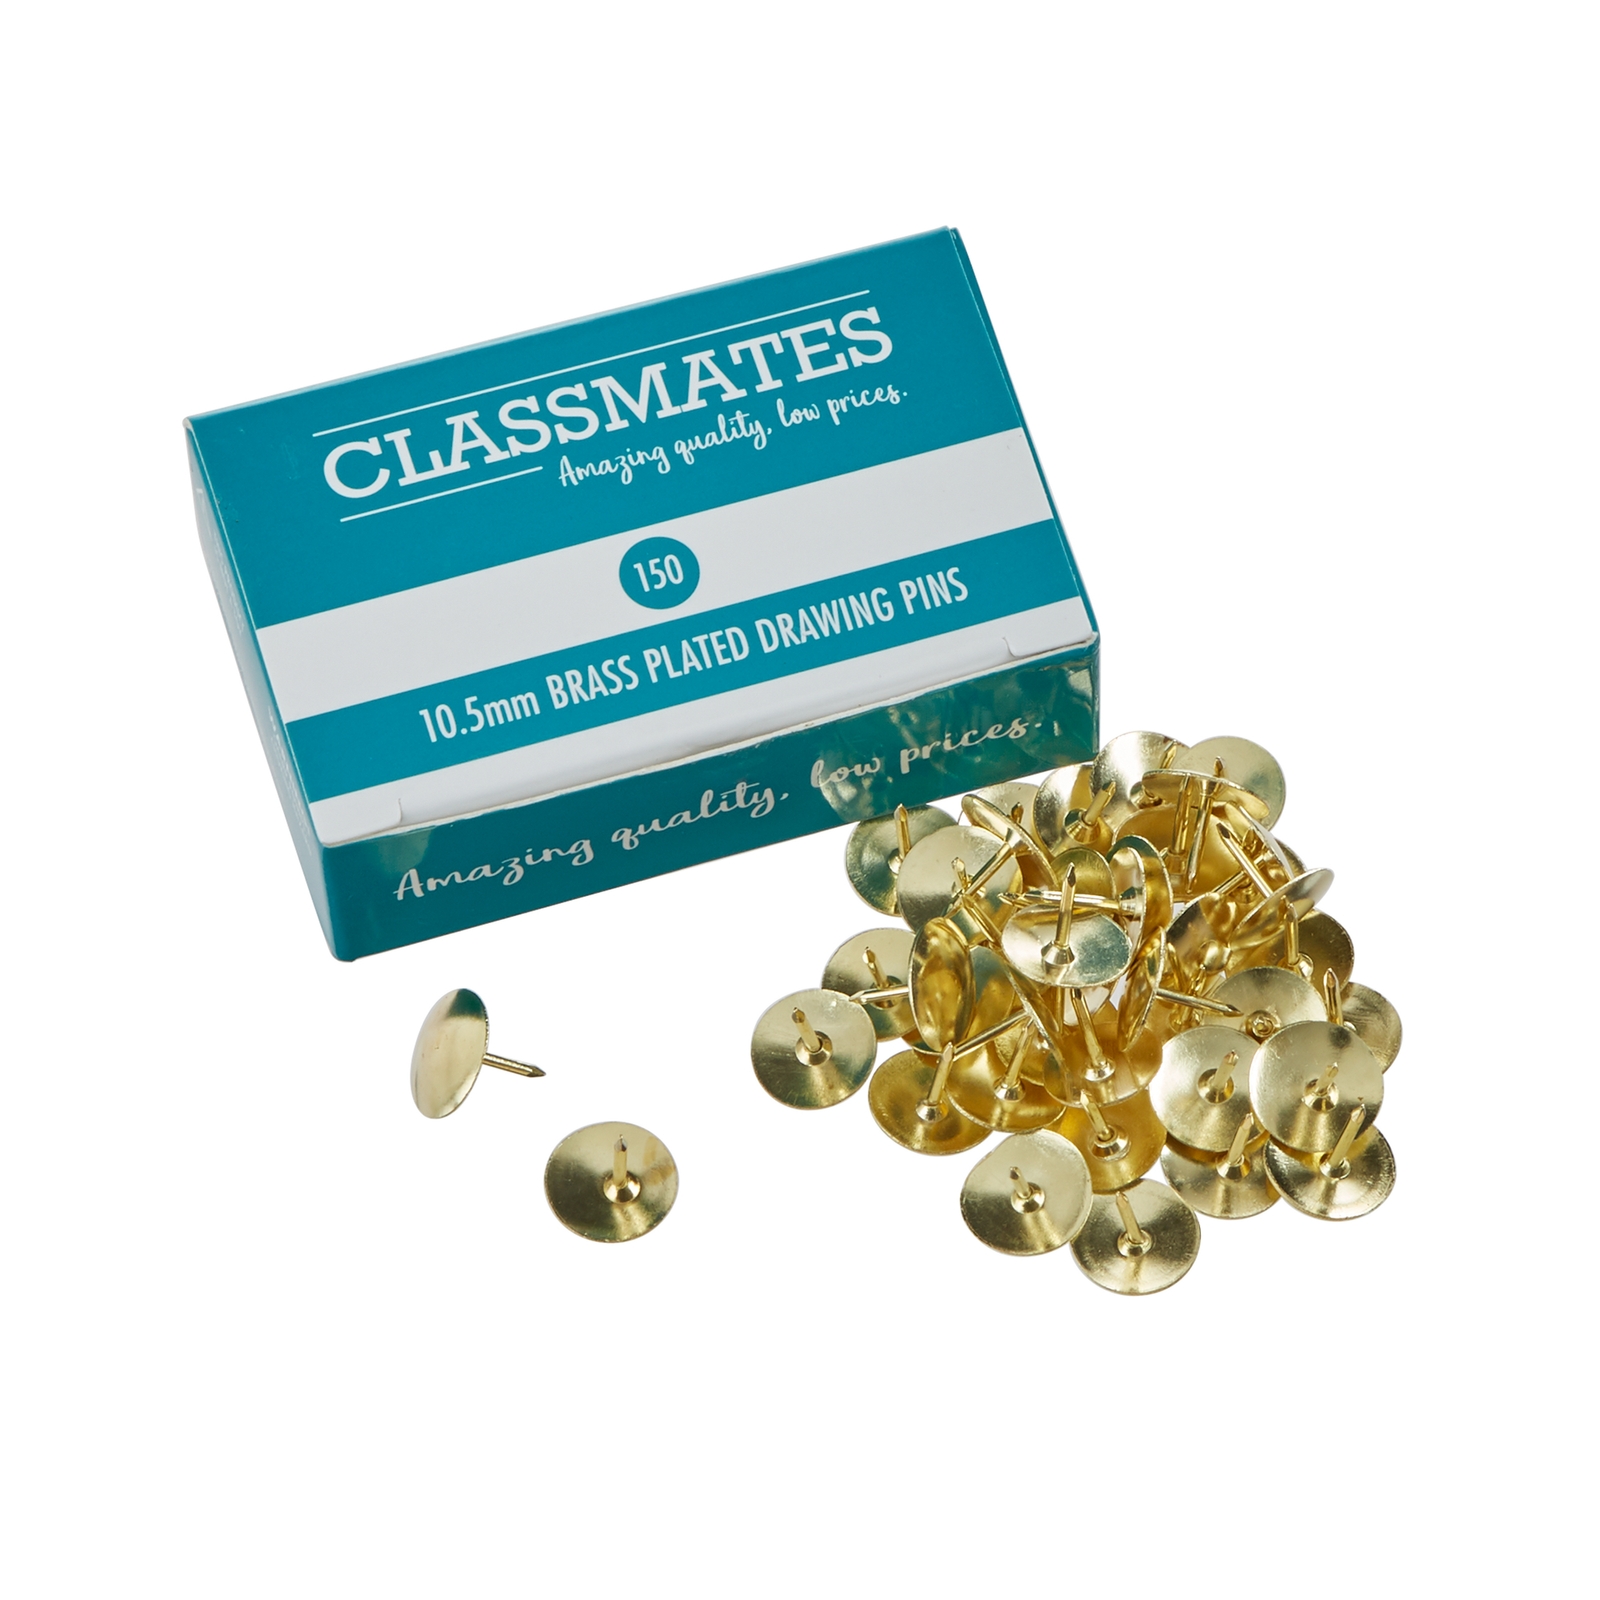 Classmates Drawing Pins - Pack of 150